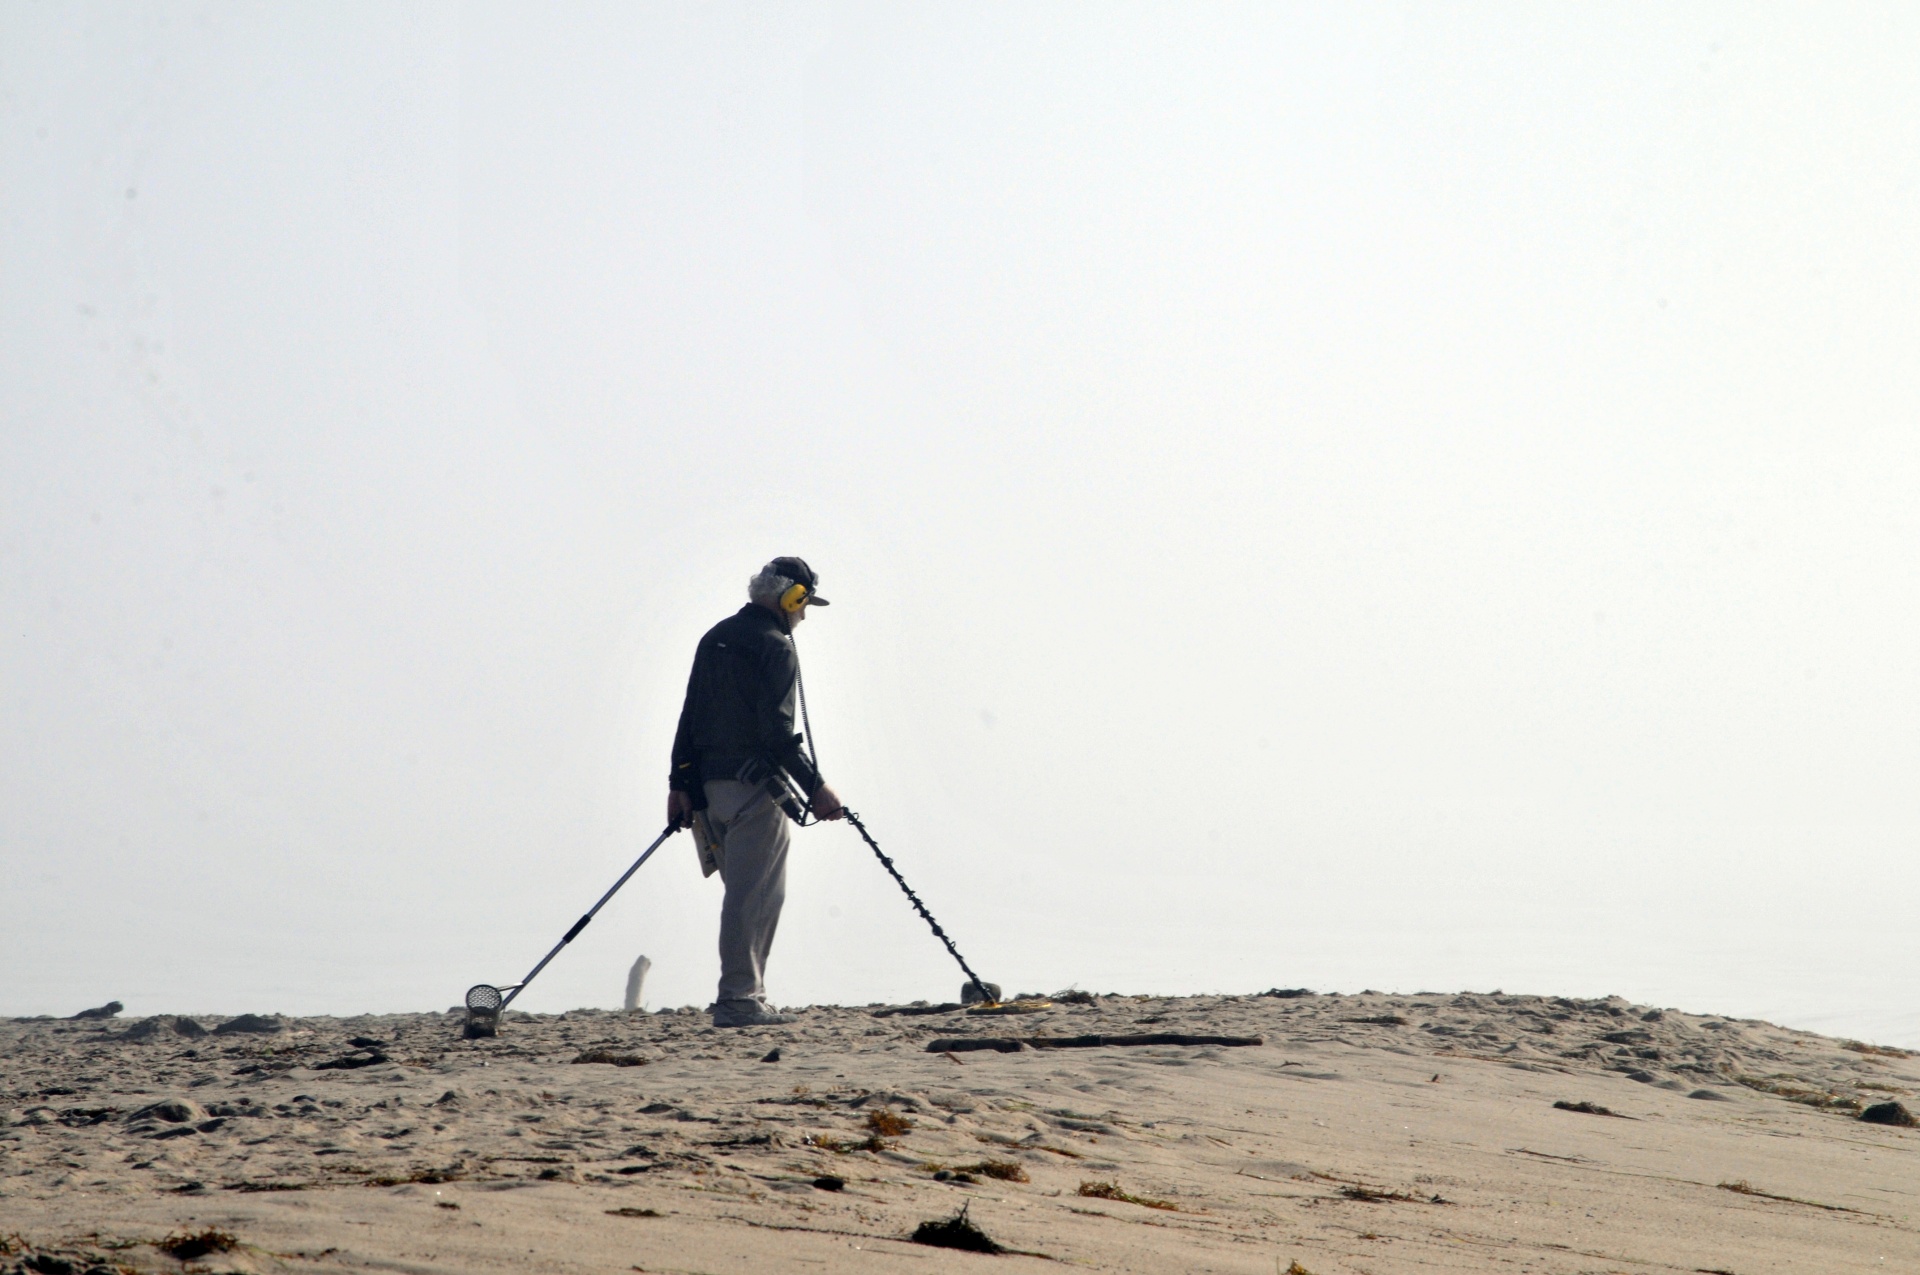 man on beach with metal detector